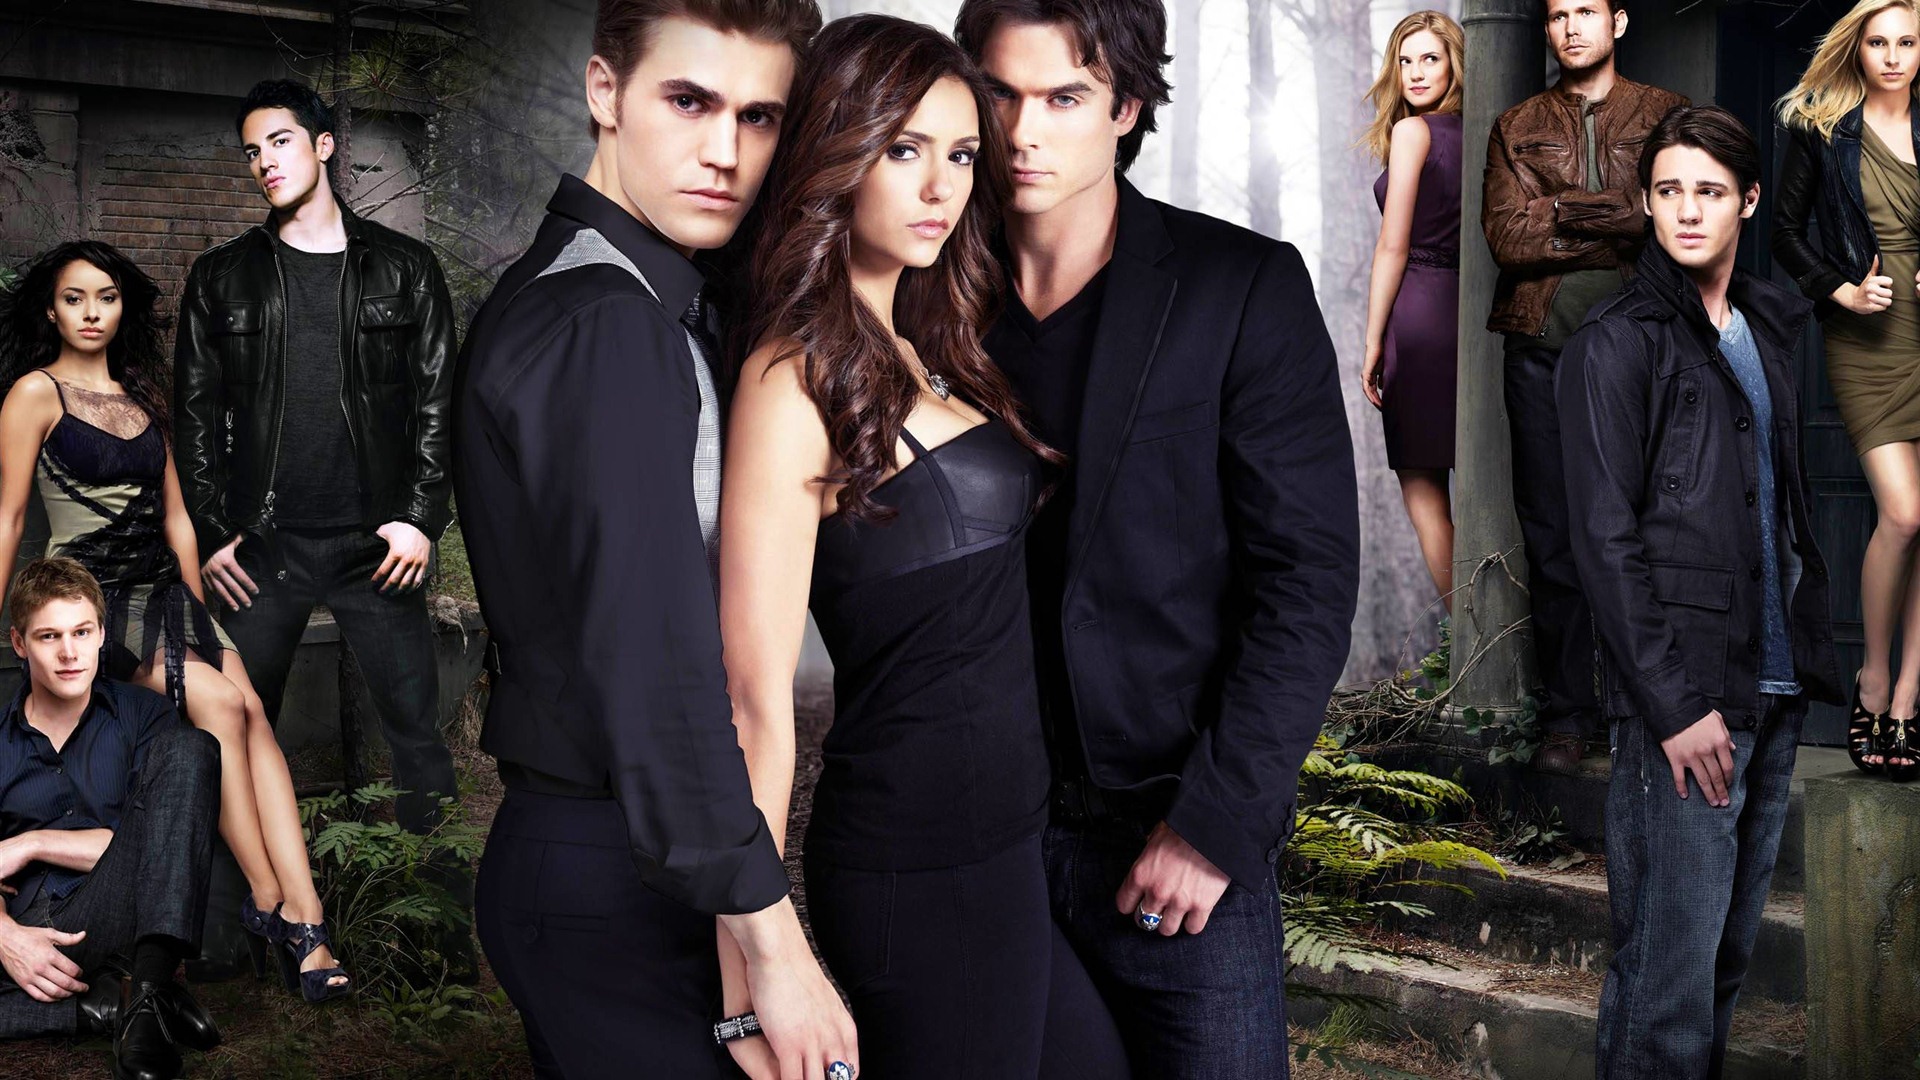 The Vampire Diaries wallpapers HD #12 - 1920x1080